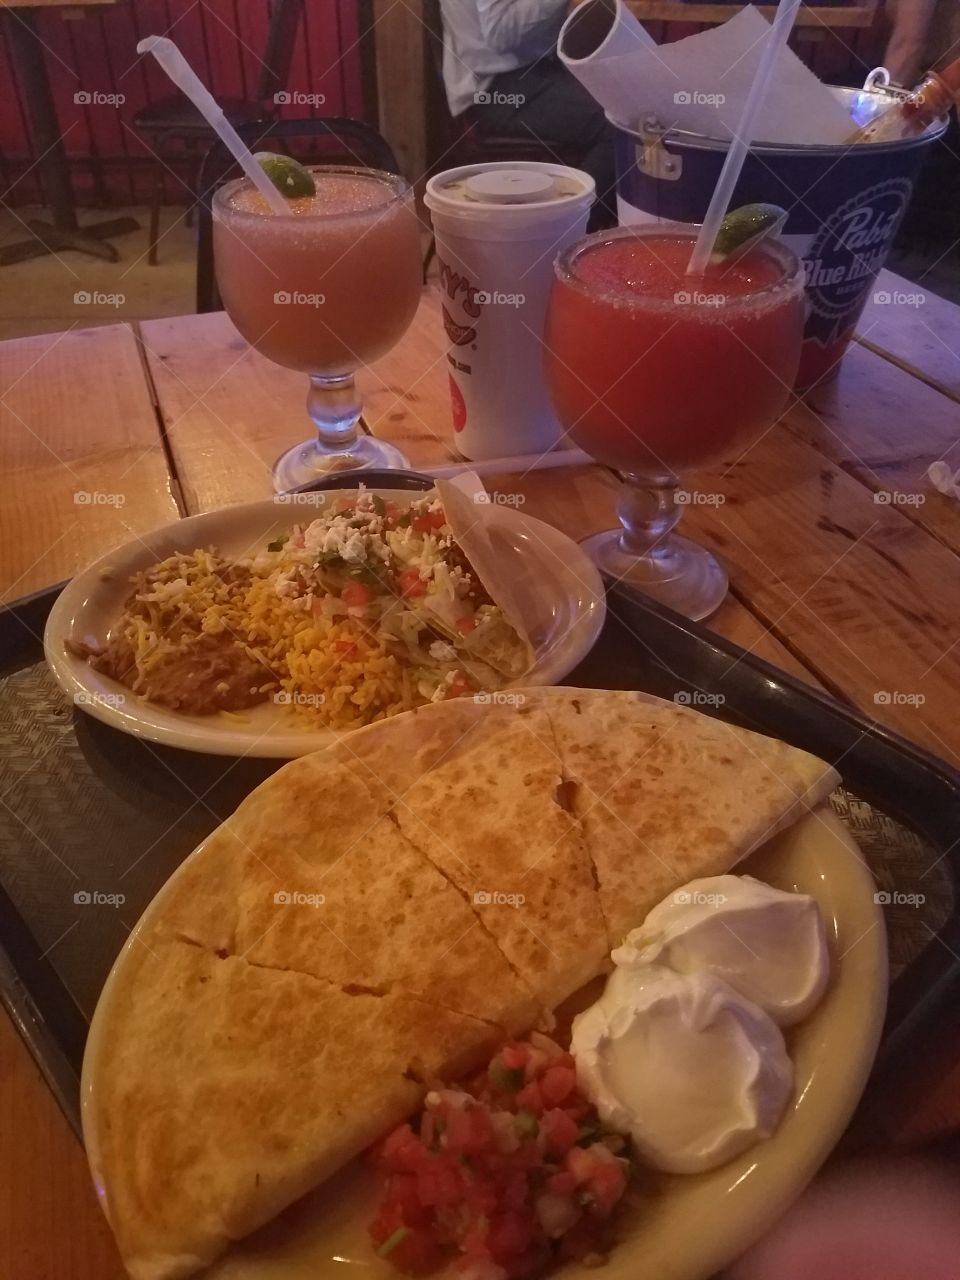 Taco Tuesday is always celebrated correctly with the essentials: margaritas, tacos and quesadillas. Yummy!